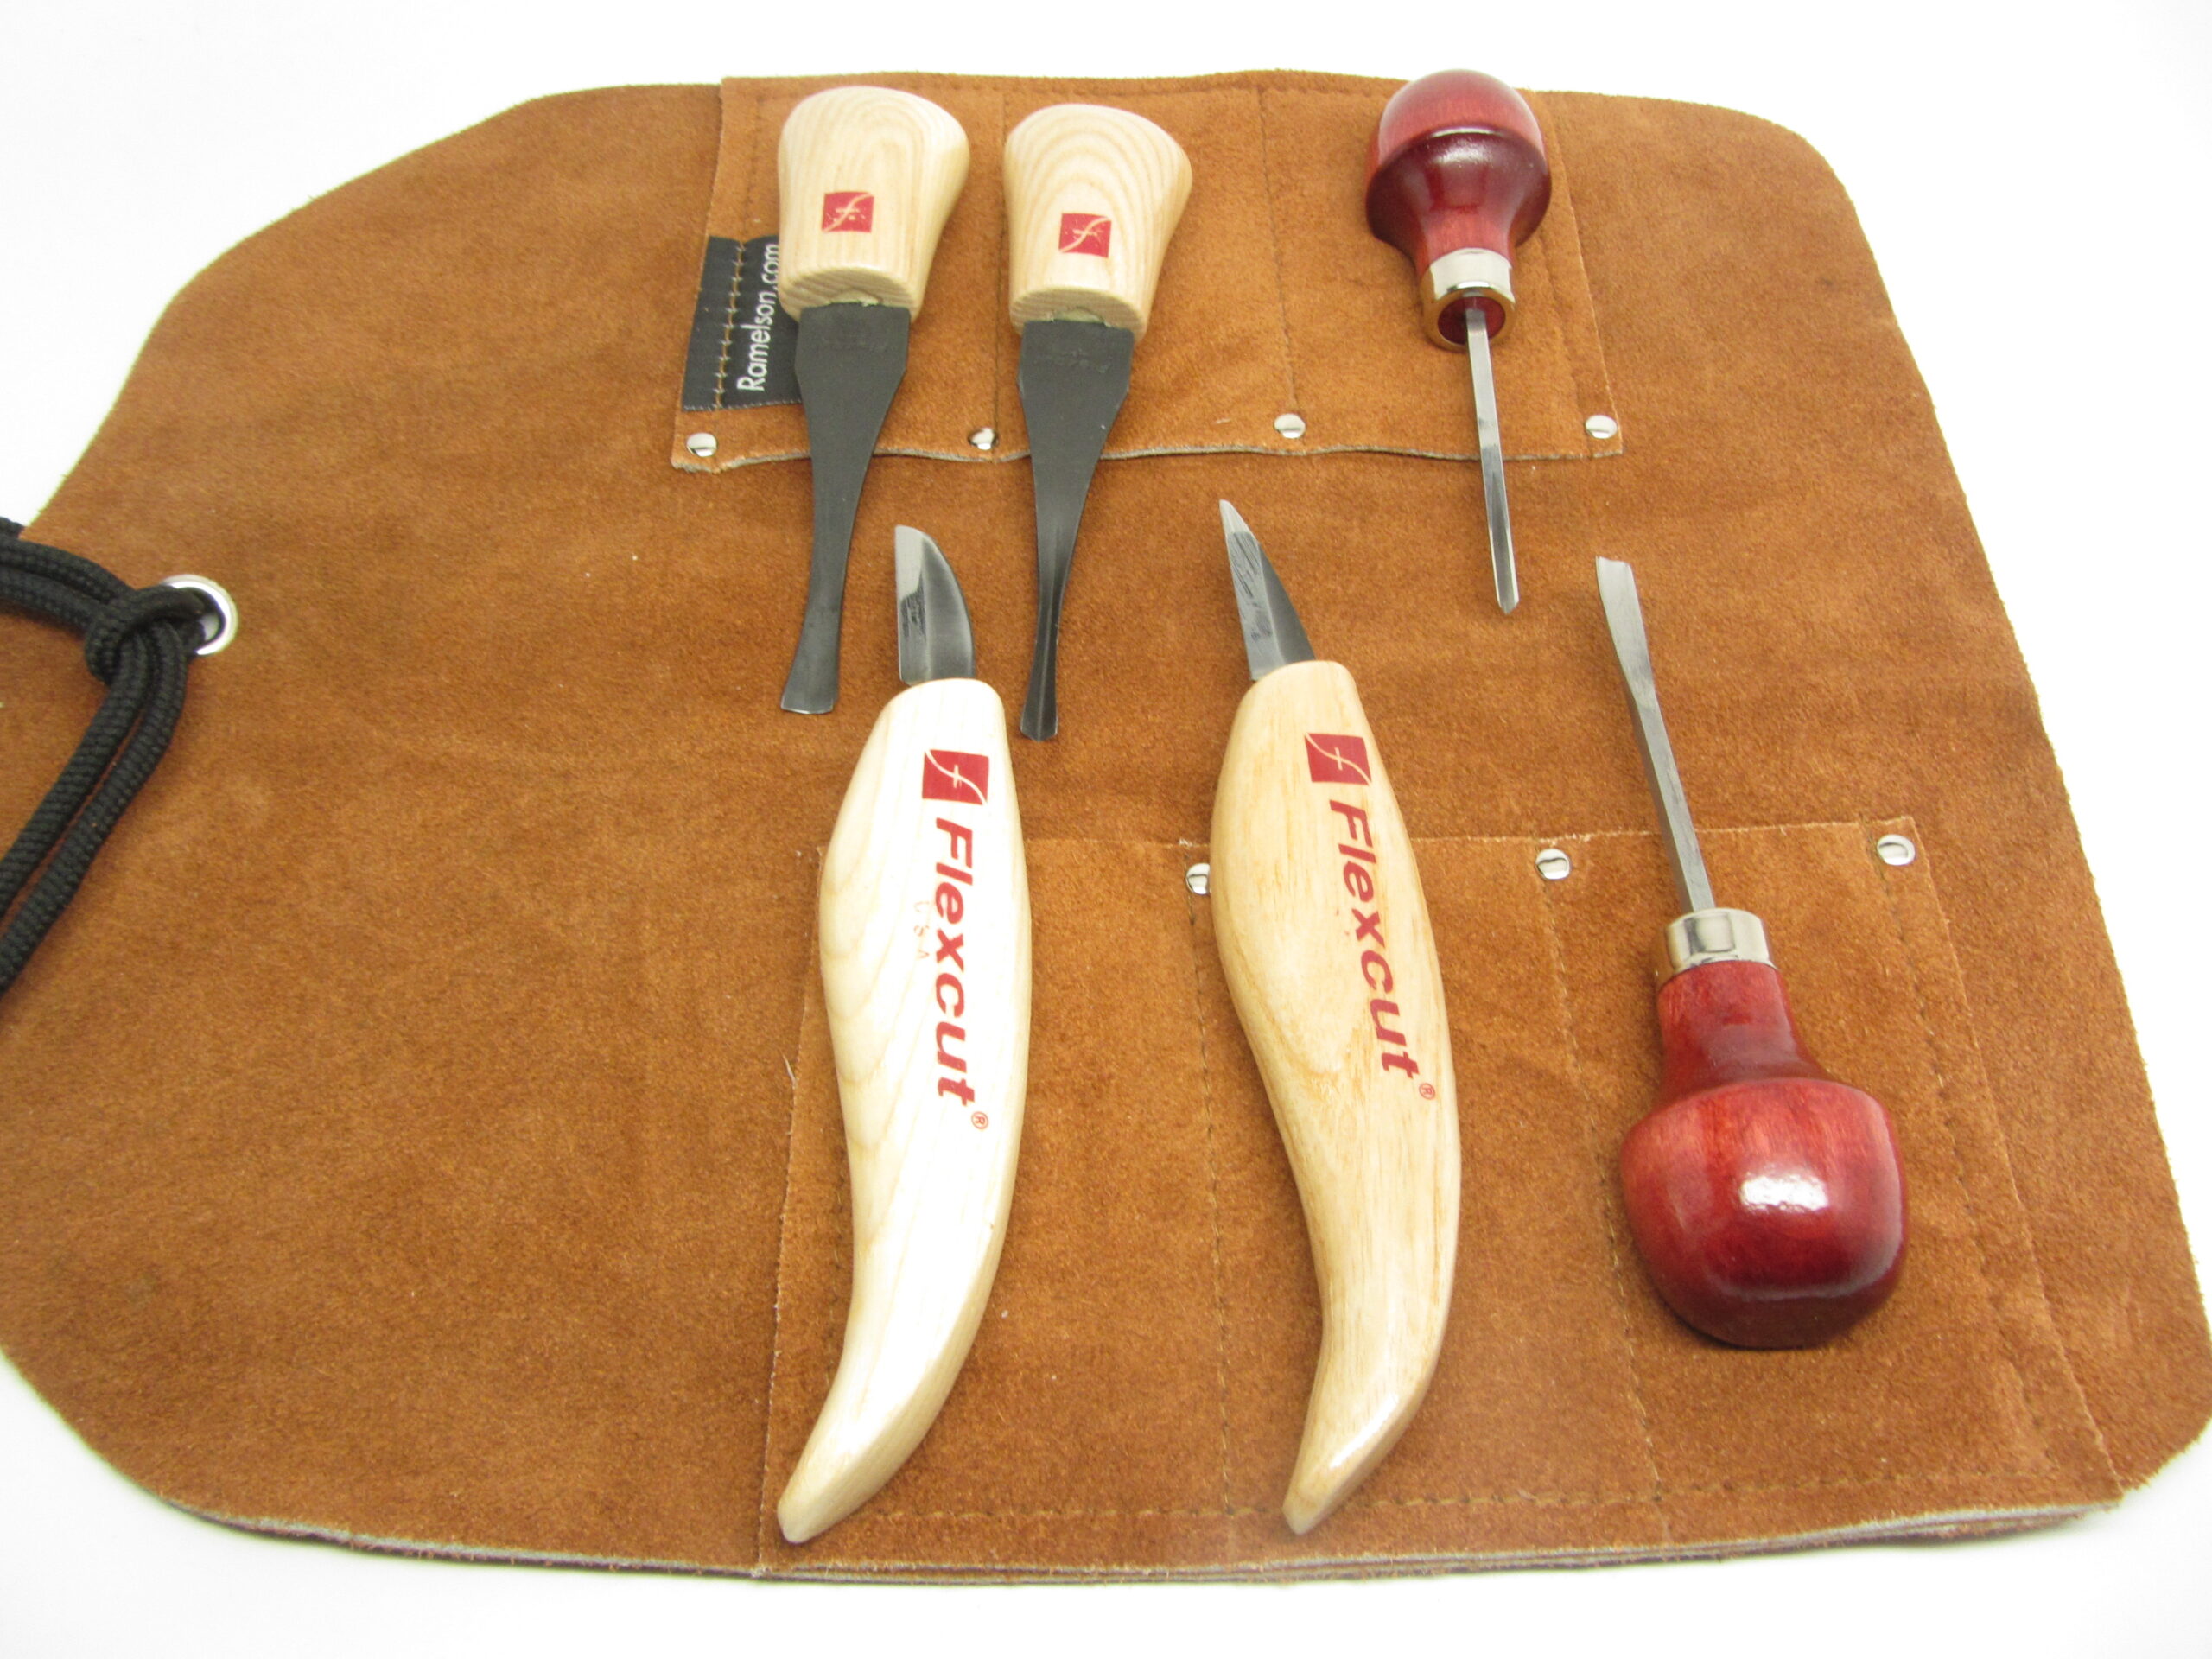 Flexcut Beginner Palm and Knife Set Ramelson Gouge & Bent V Woodcarving Tools, Size: One Size